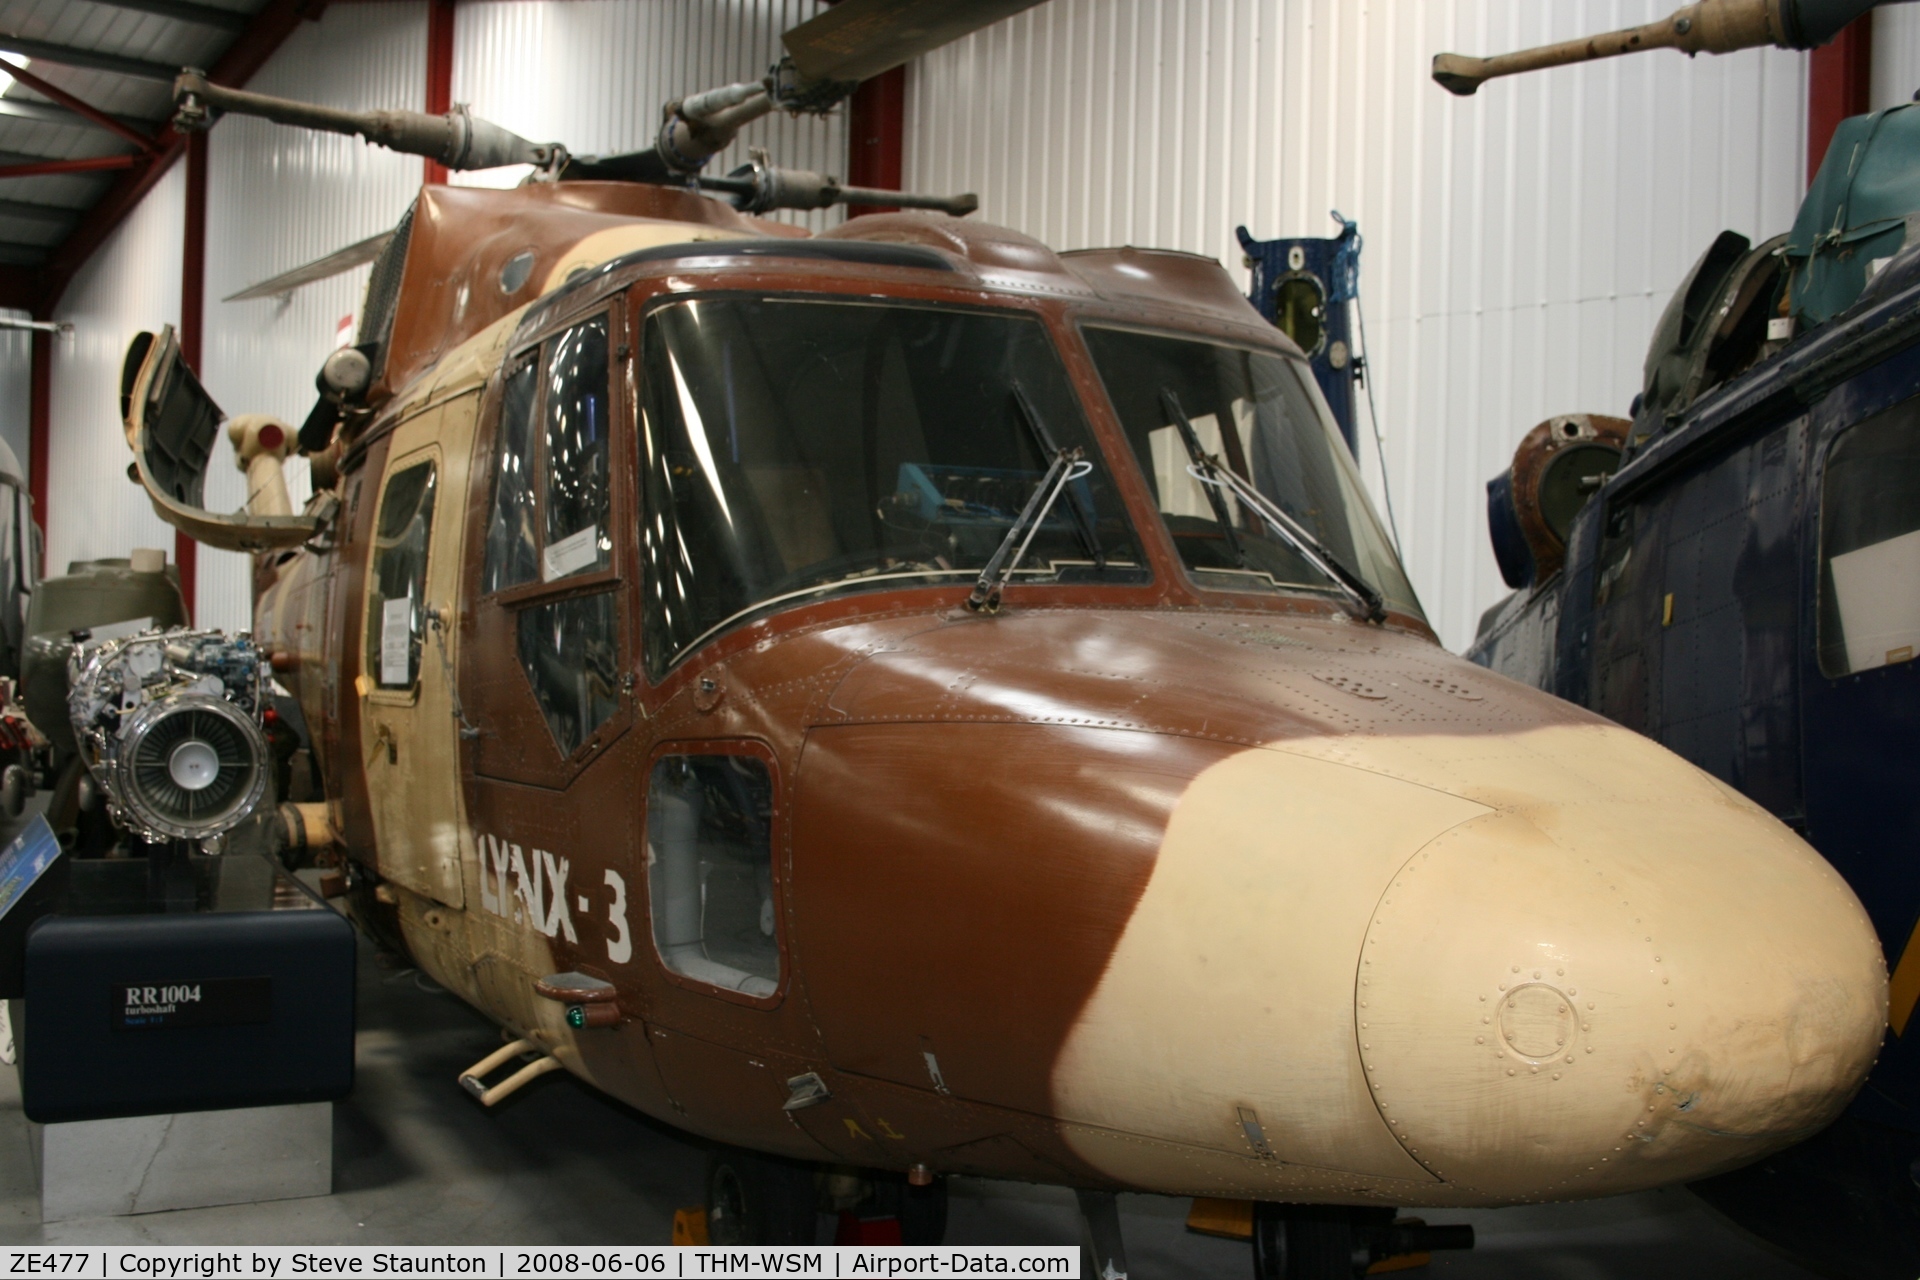 ZE477, 1984 Westland Lynx HAS.3 C/N 310/001P, Taken at the Helicopter Museum (http://www.helicoptermuseum.co.uk/)